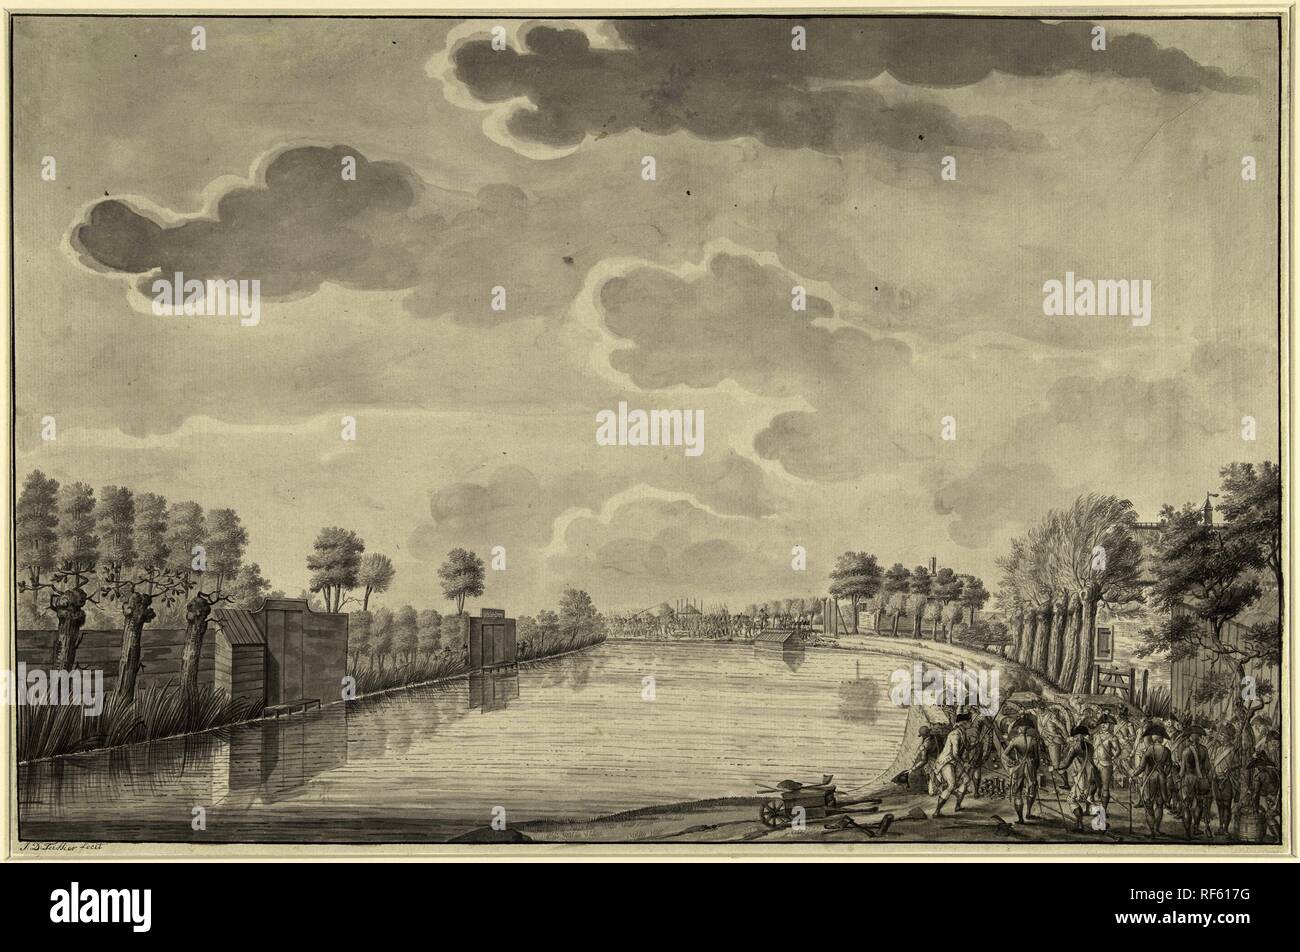 Attack at Ouderkerk aan de Amstel at the Binnen-Bullewijk, 1787. Draughtsman: Jean George Teissier (signed by artist). Dating: 1788 - 1790. Place: Northern Netherlands. Measurements: h 314 mm × w 478 mm. Museum: Rijksmuseum, Amsterdam. Stock Photo